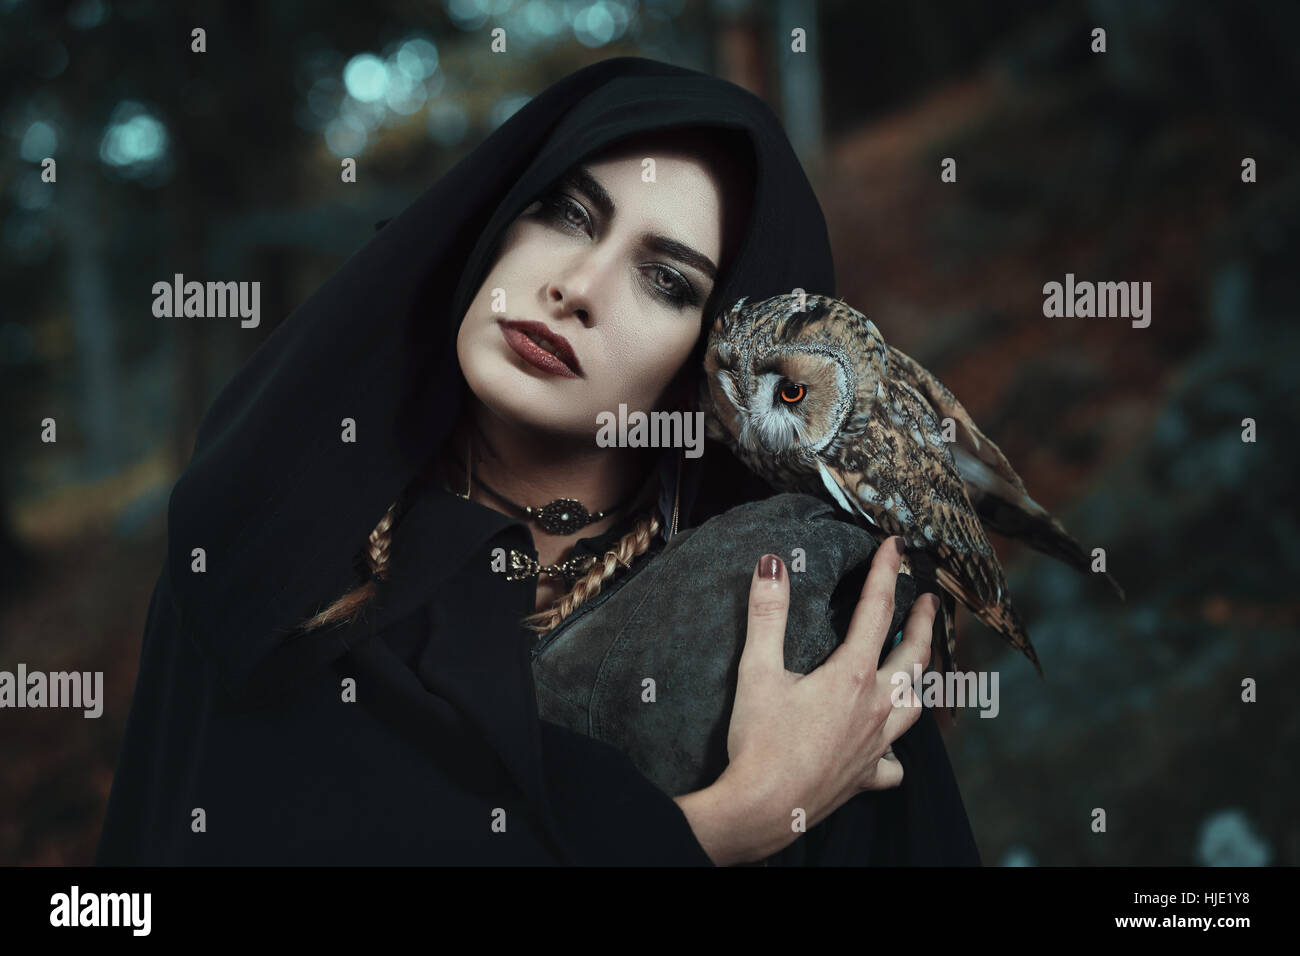 Dark witch of the forest with her owl familiar. Fantasy and fairytale Stock Photo